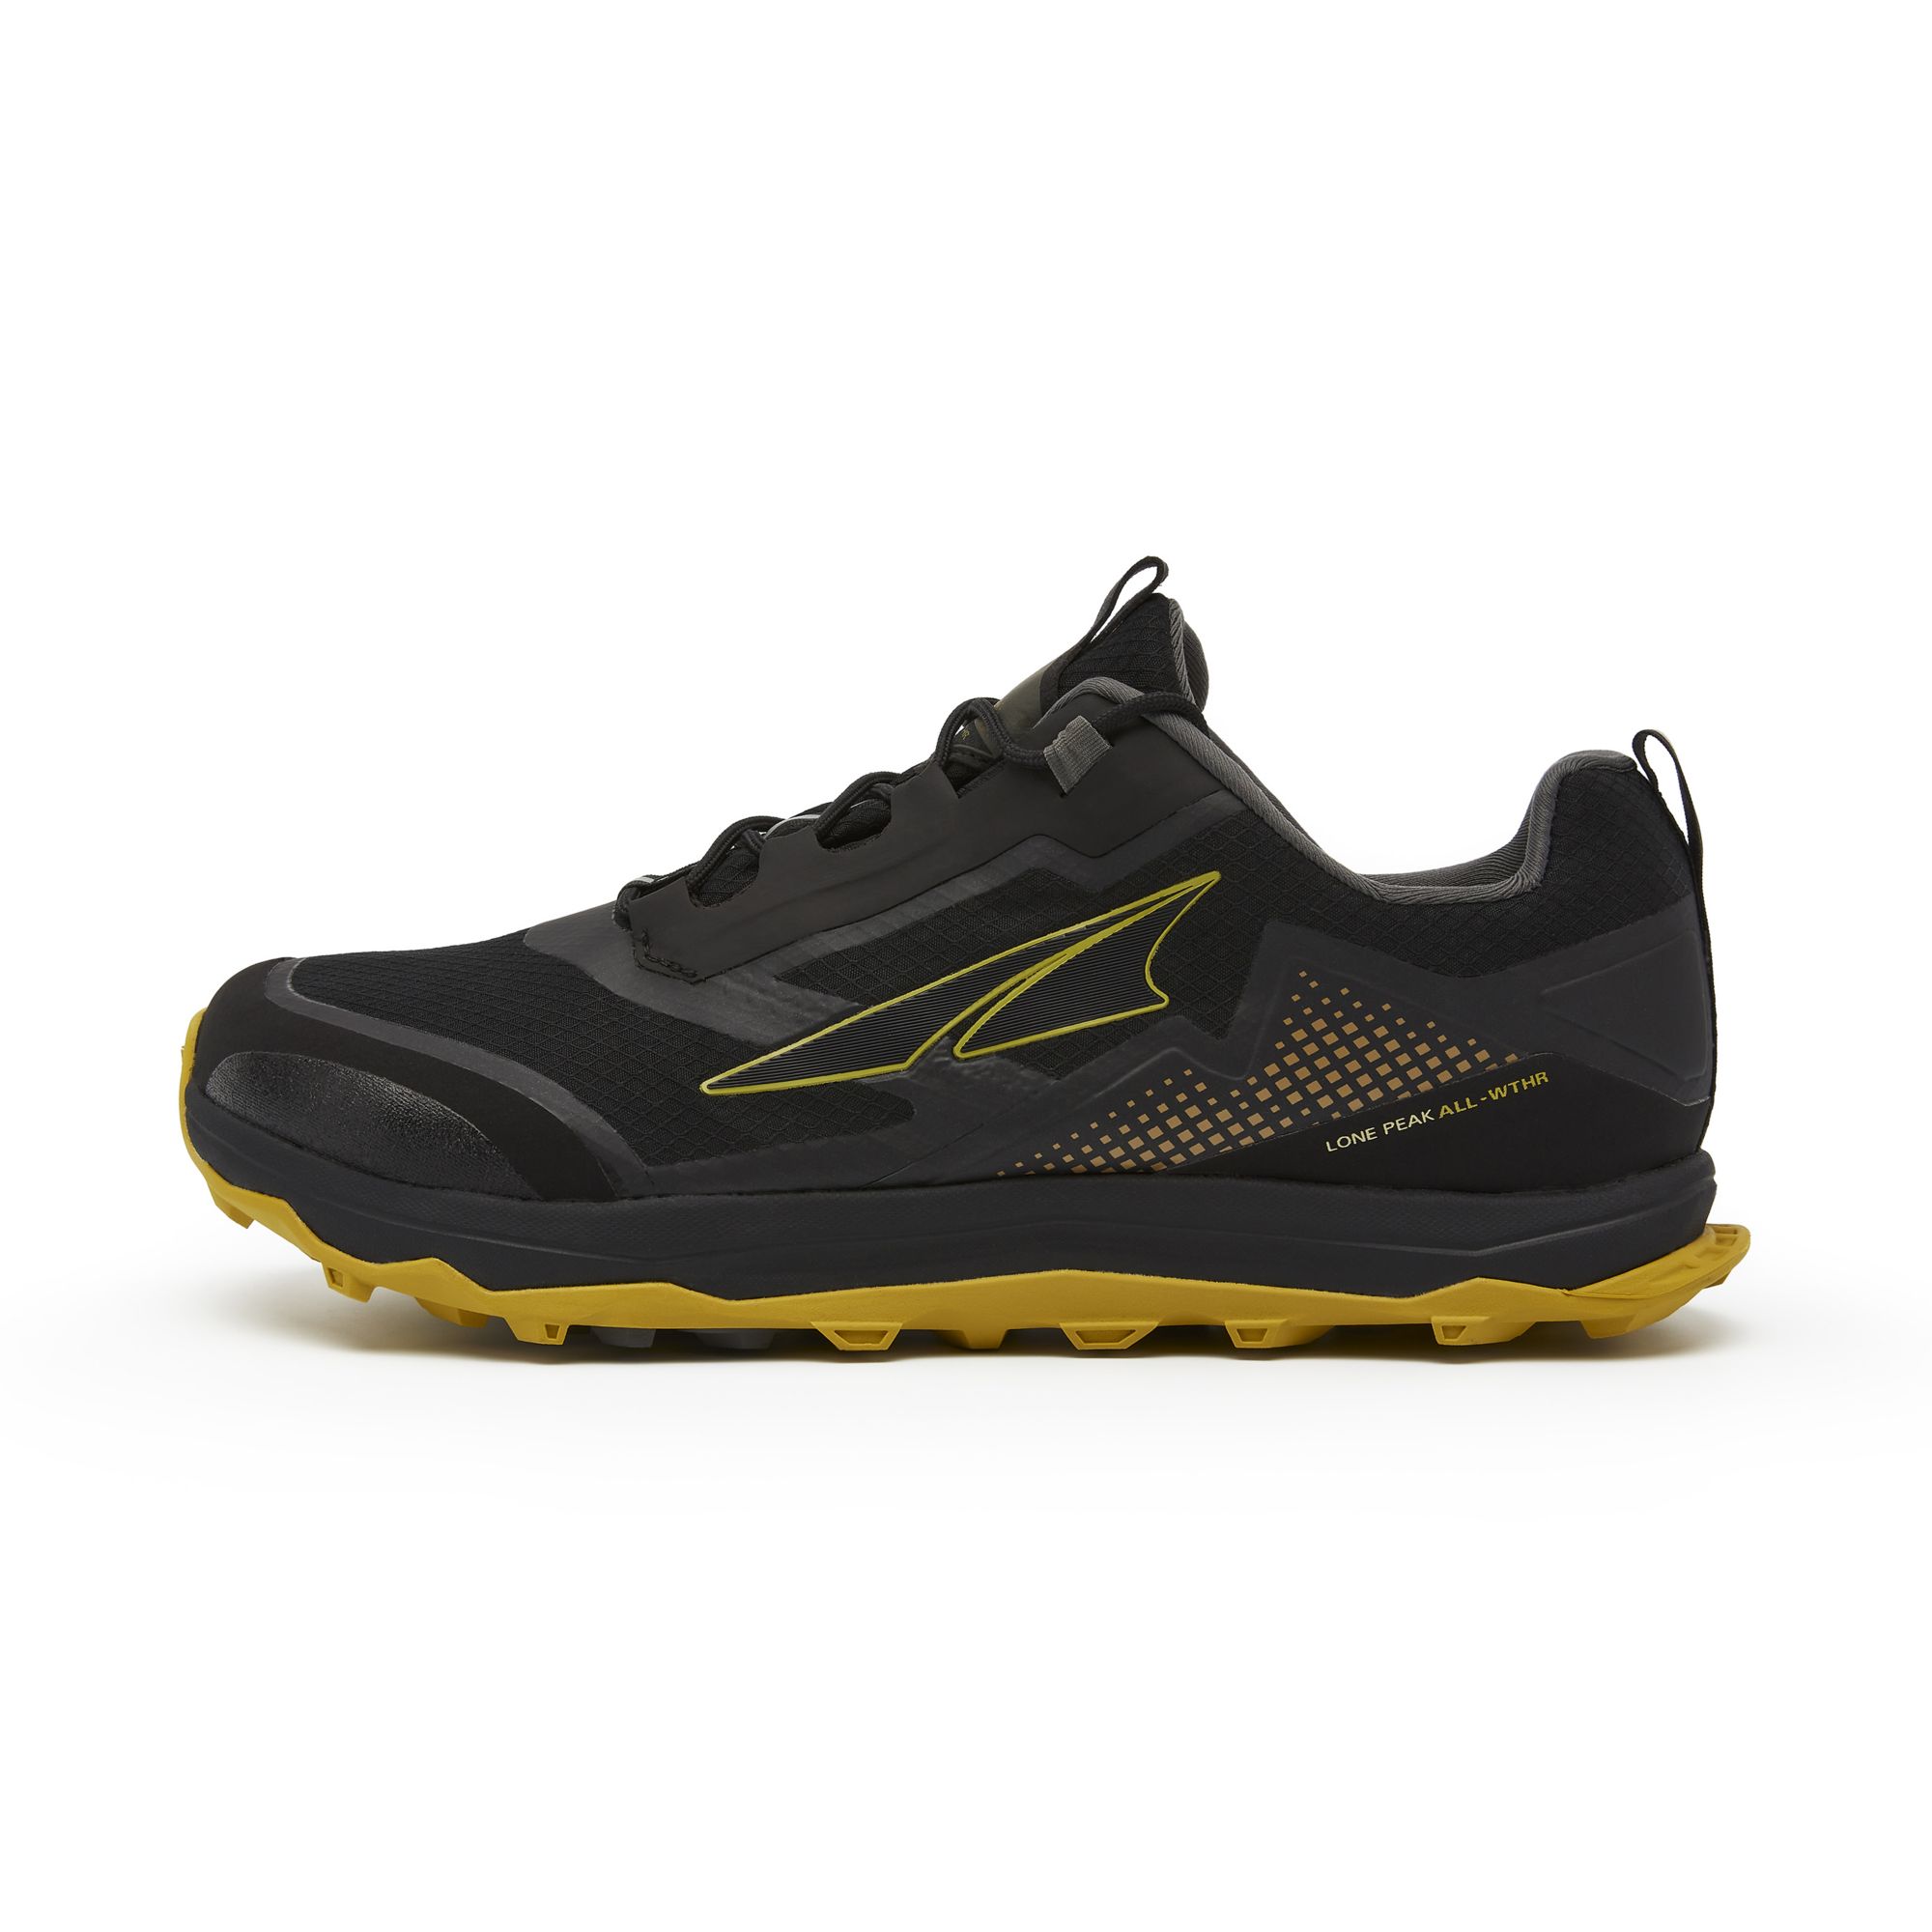 Altra Lone Peak ALL-WTHR Low - Weatherproof, Supportive Running Shoes 1